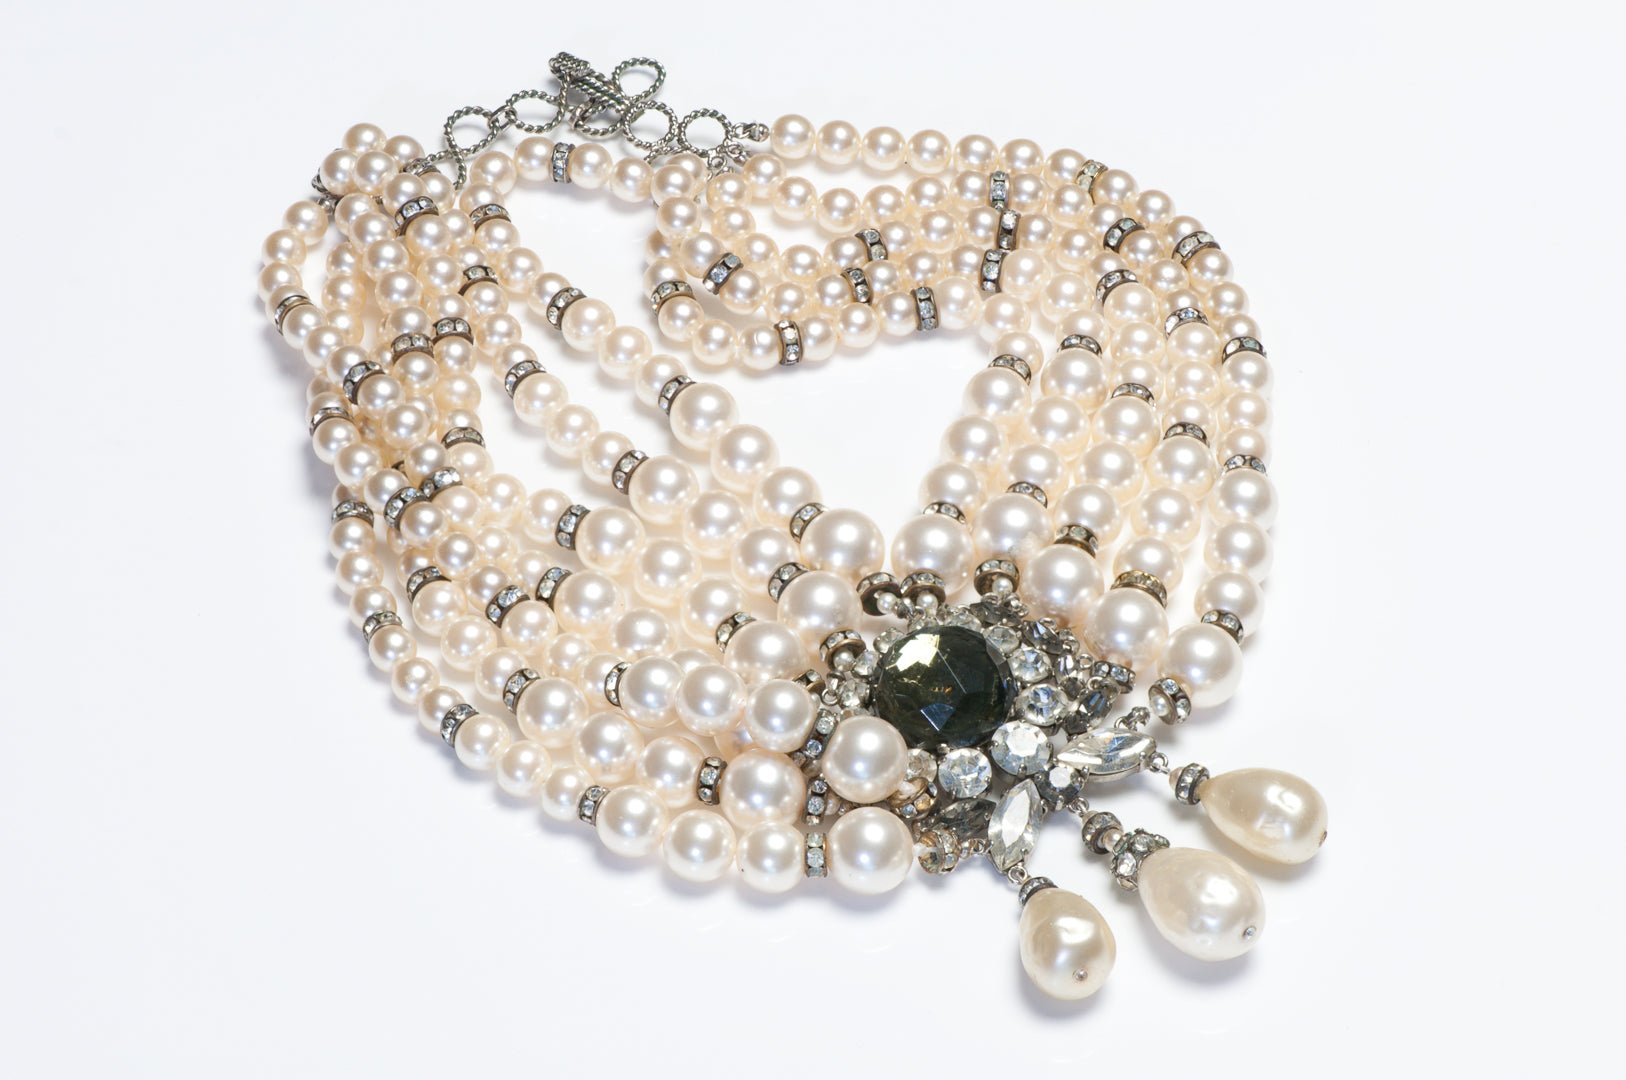 Christian Dior Couture 1950's Roger Jean-Pierre Pearl Crystal Choker Necklace